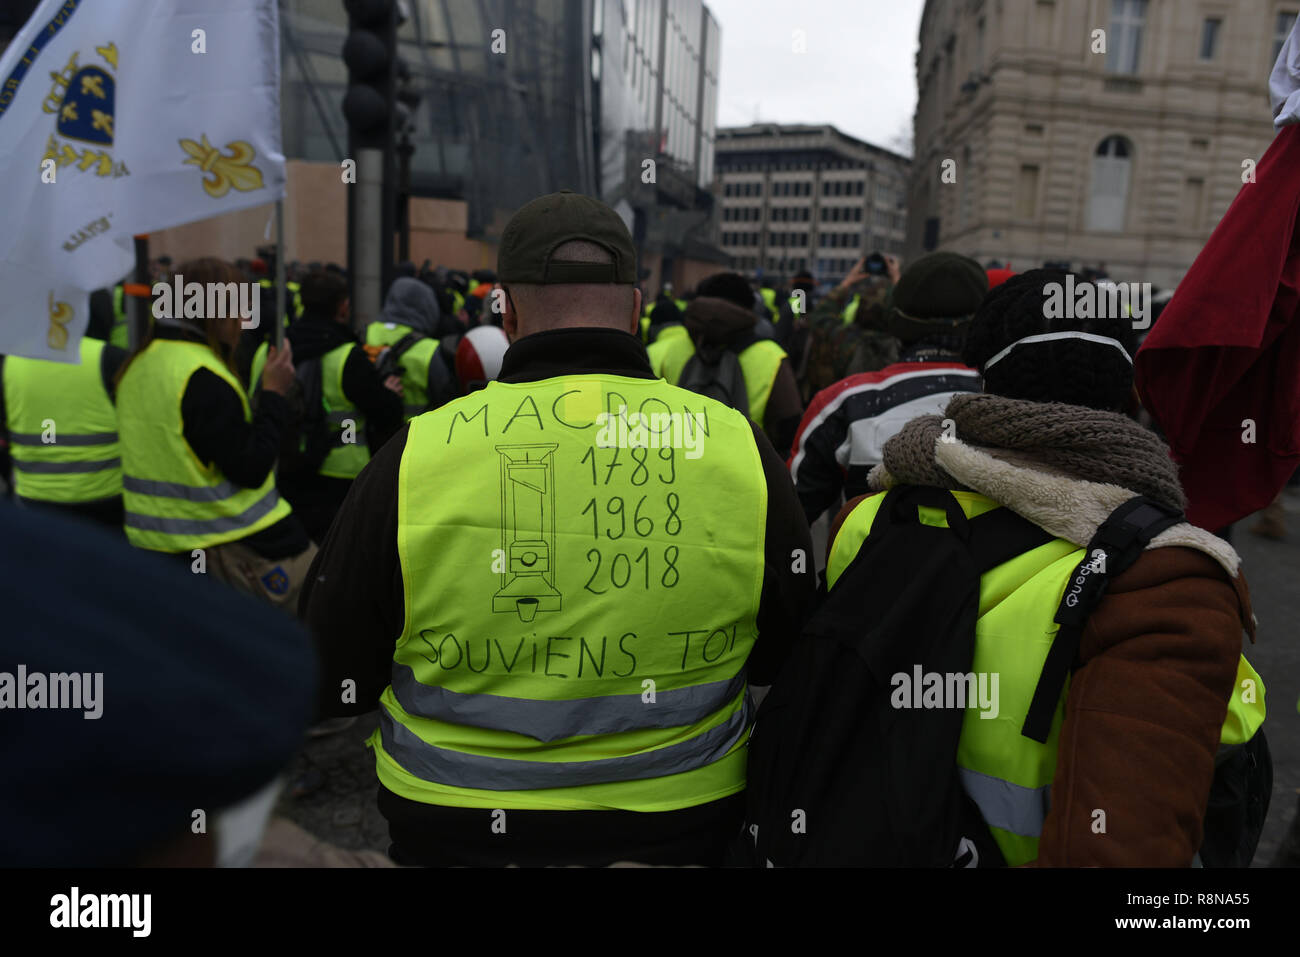 December 08, 2018 - Paris, France: A Yellow Vest protester on the  Champs-Elysees avenue. The message on his vest shows a guillotine and reads  "1789, 1968, 2018 - Macron, remember". Manifestation des